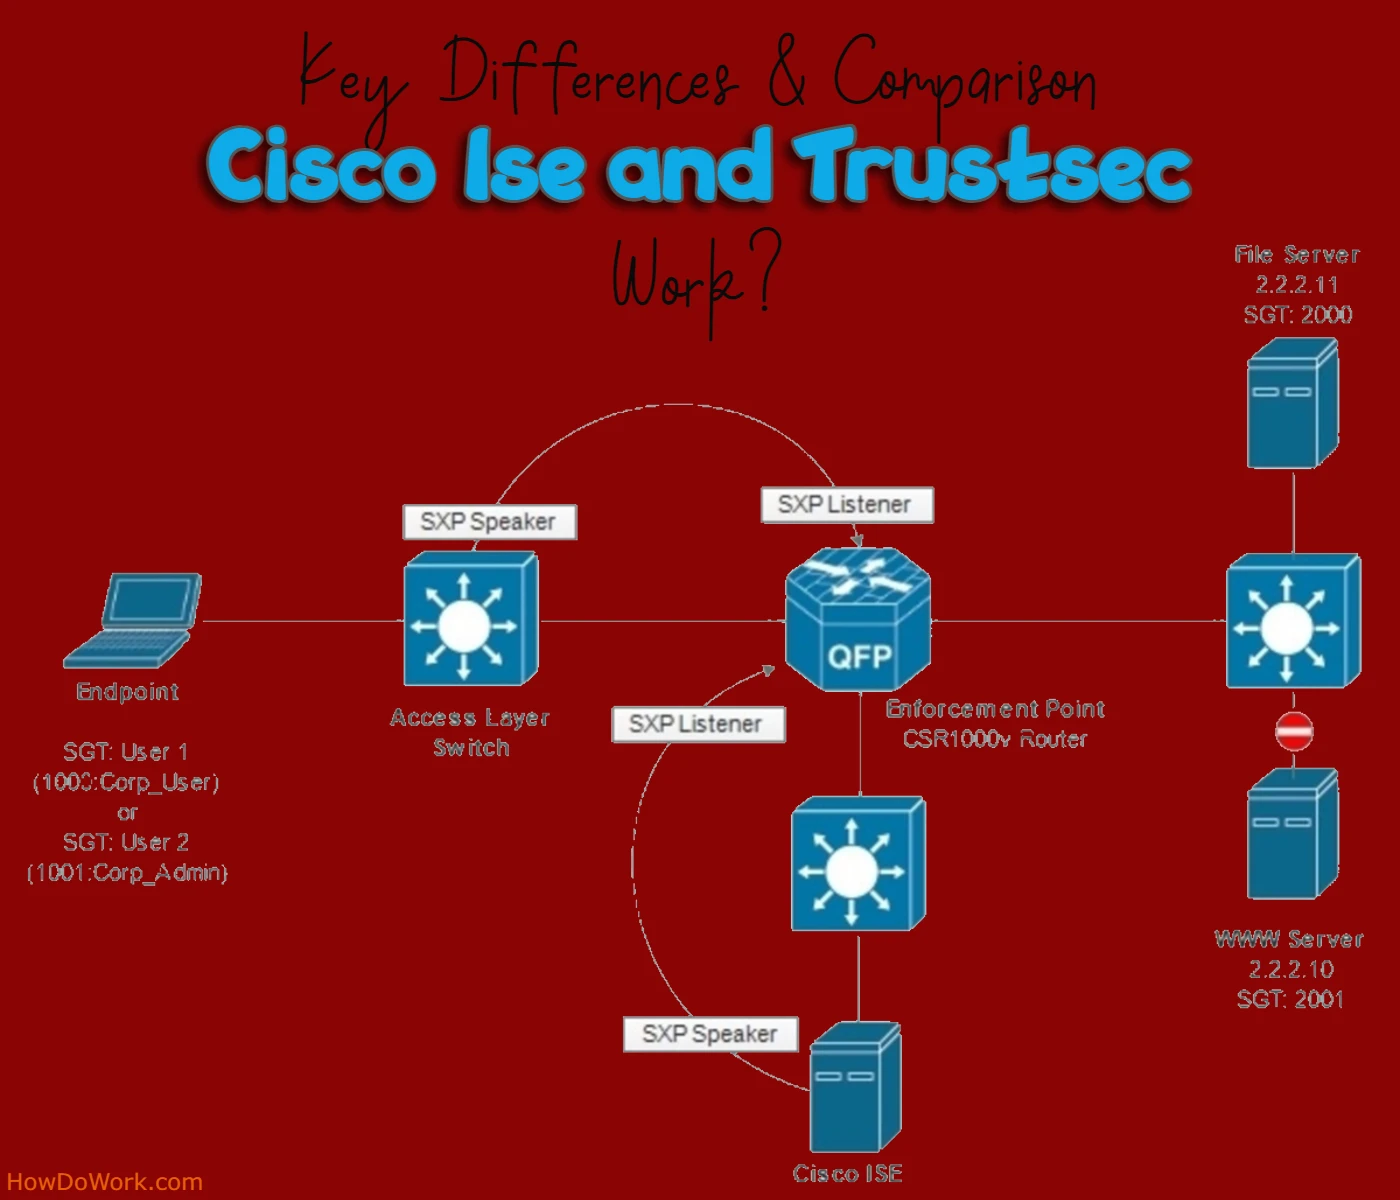 How Do Cisco Ise and Trustsec Work